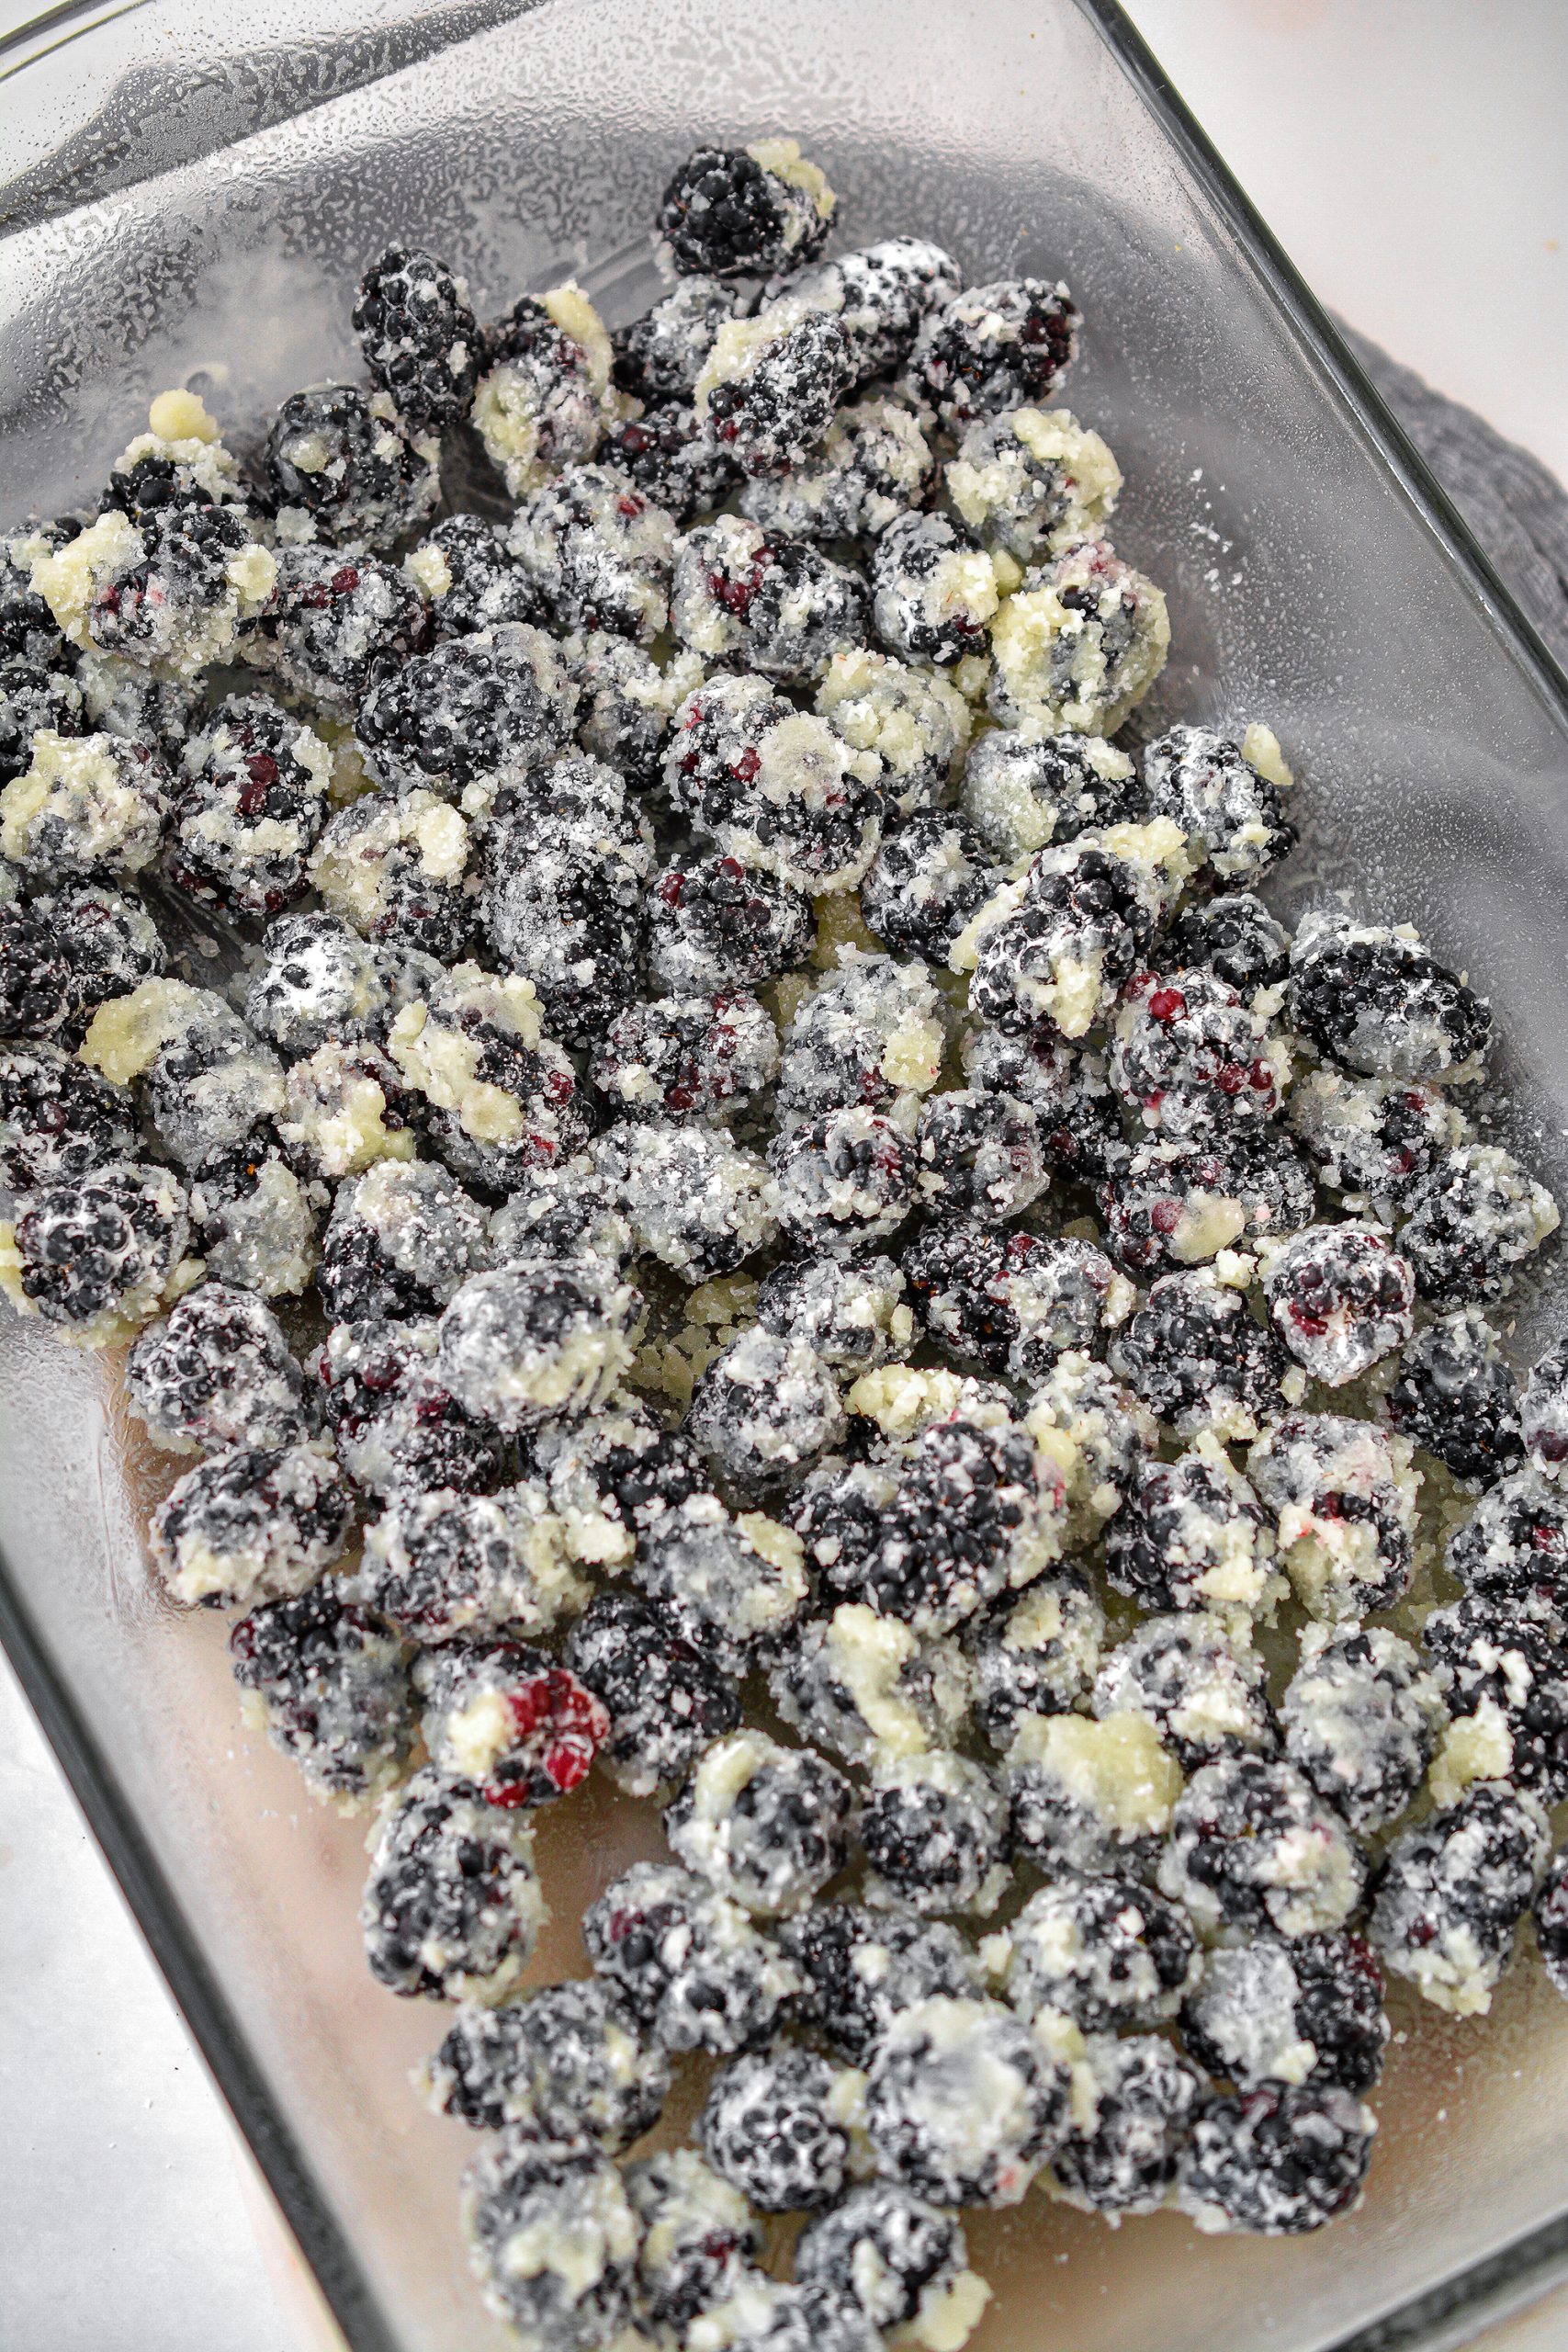 Layer the berries in the bottom of a well-greased 9x13 baking dish.